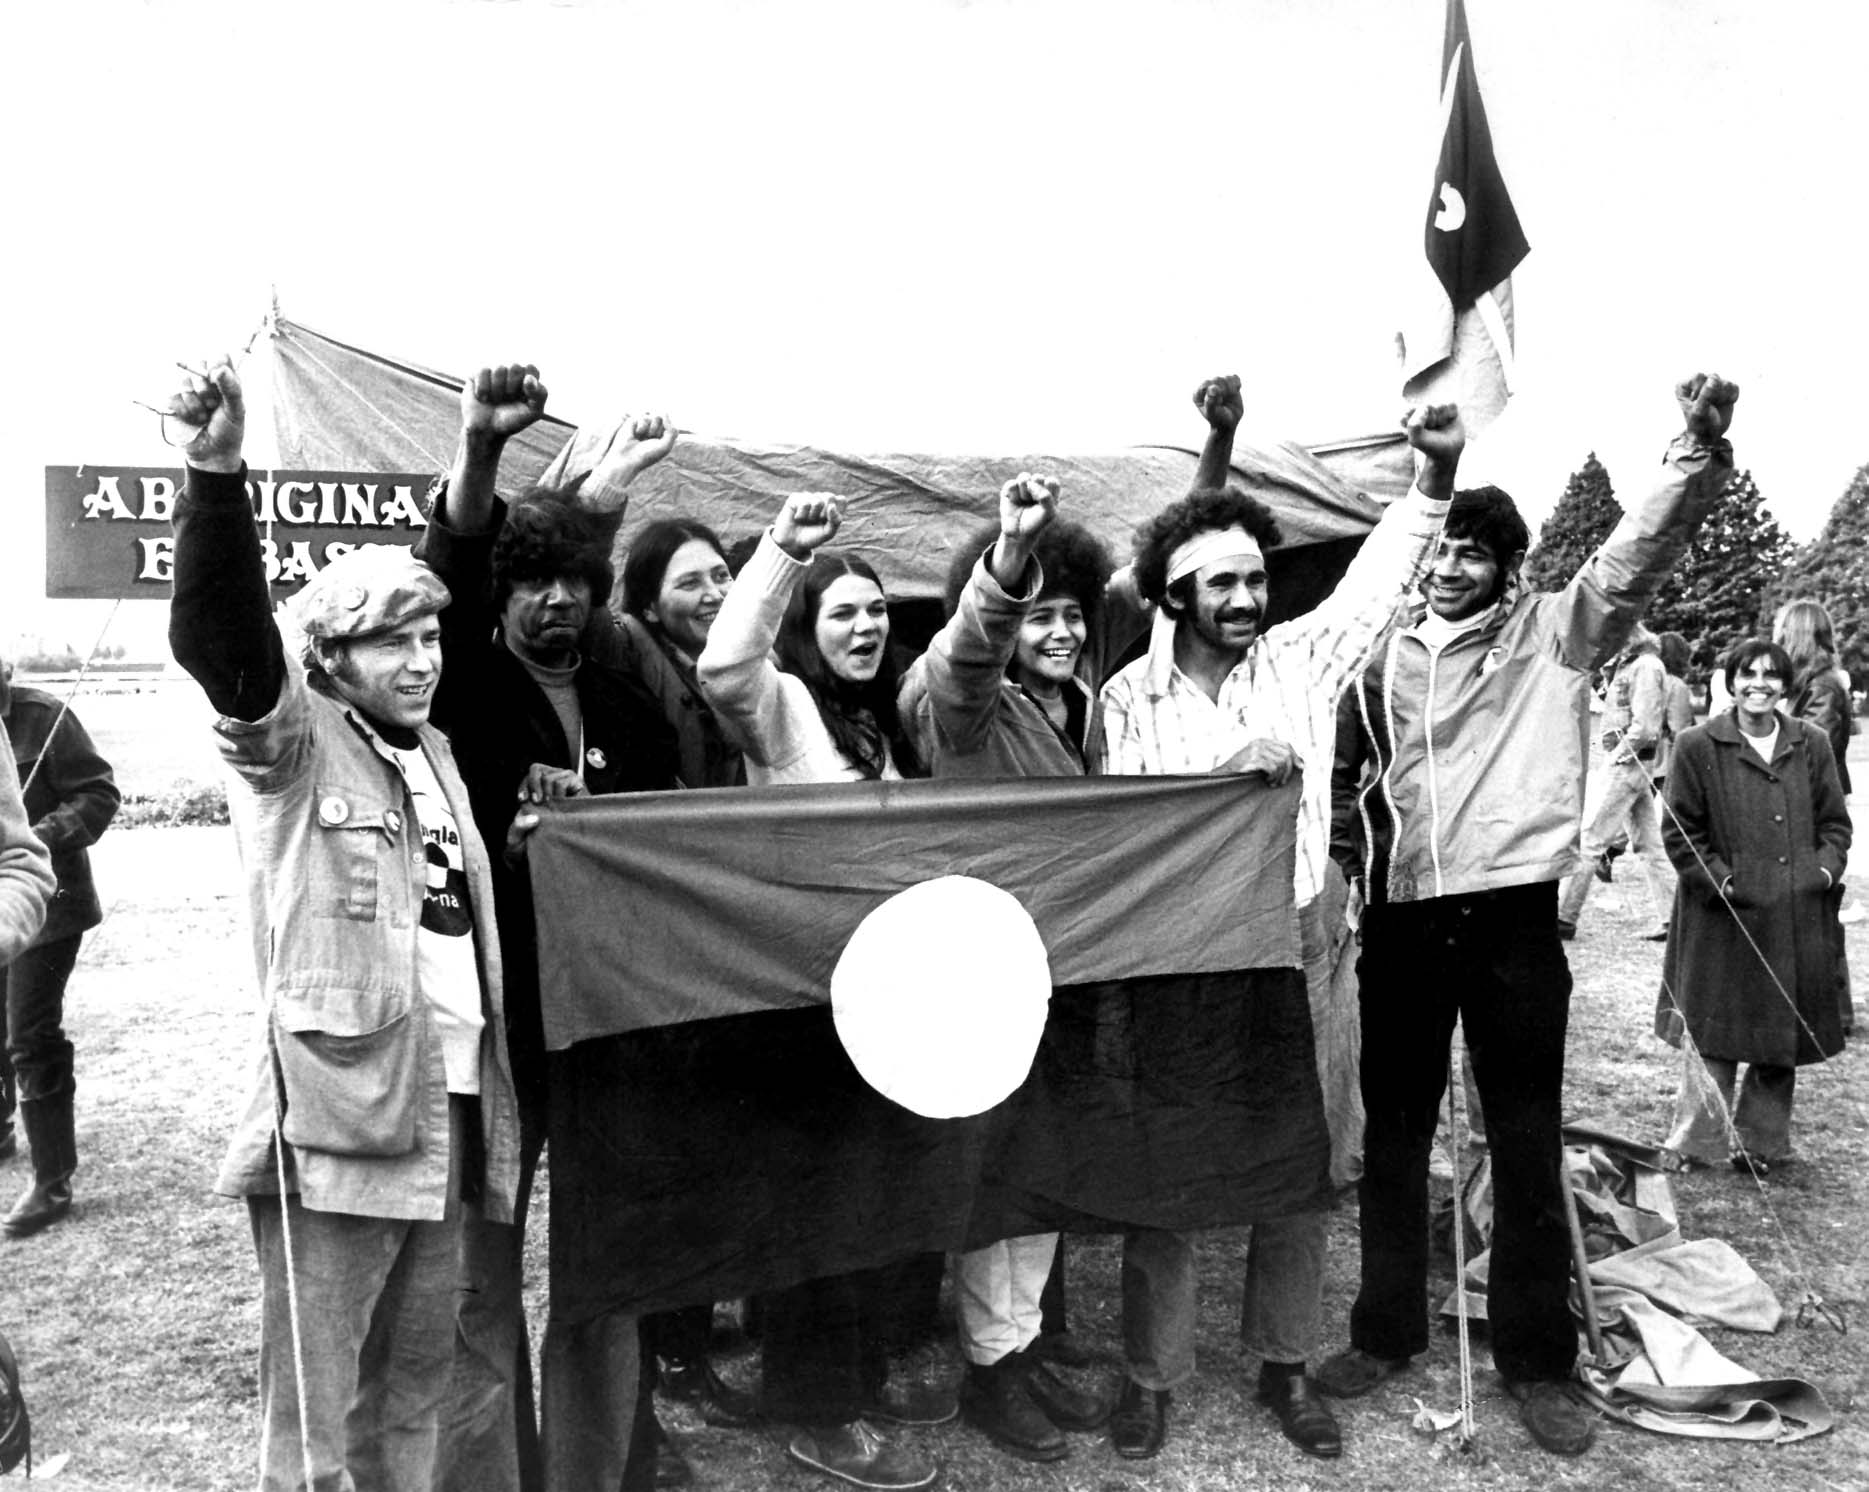 black and white image of 7 aboriginal protestors with raised fist behind the aboriginal flag - red at the top, yellow circile in the middle and black band at the bottom. 